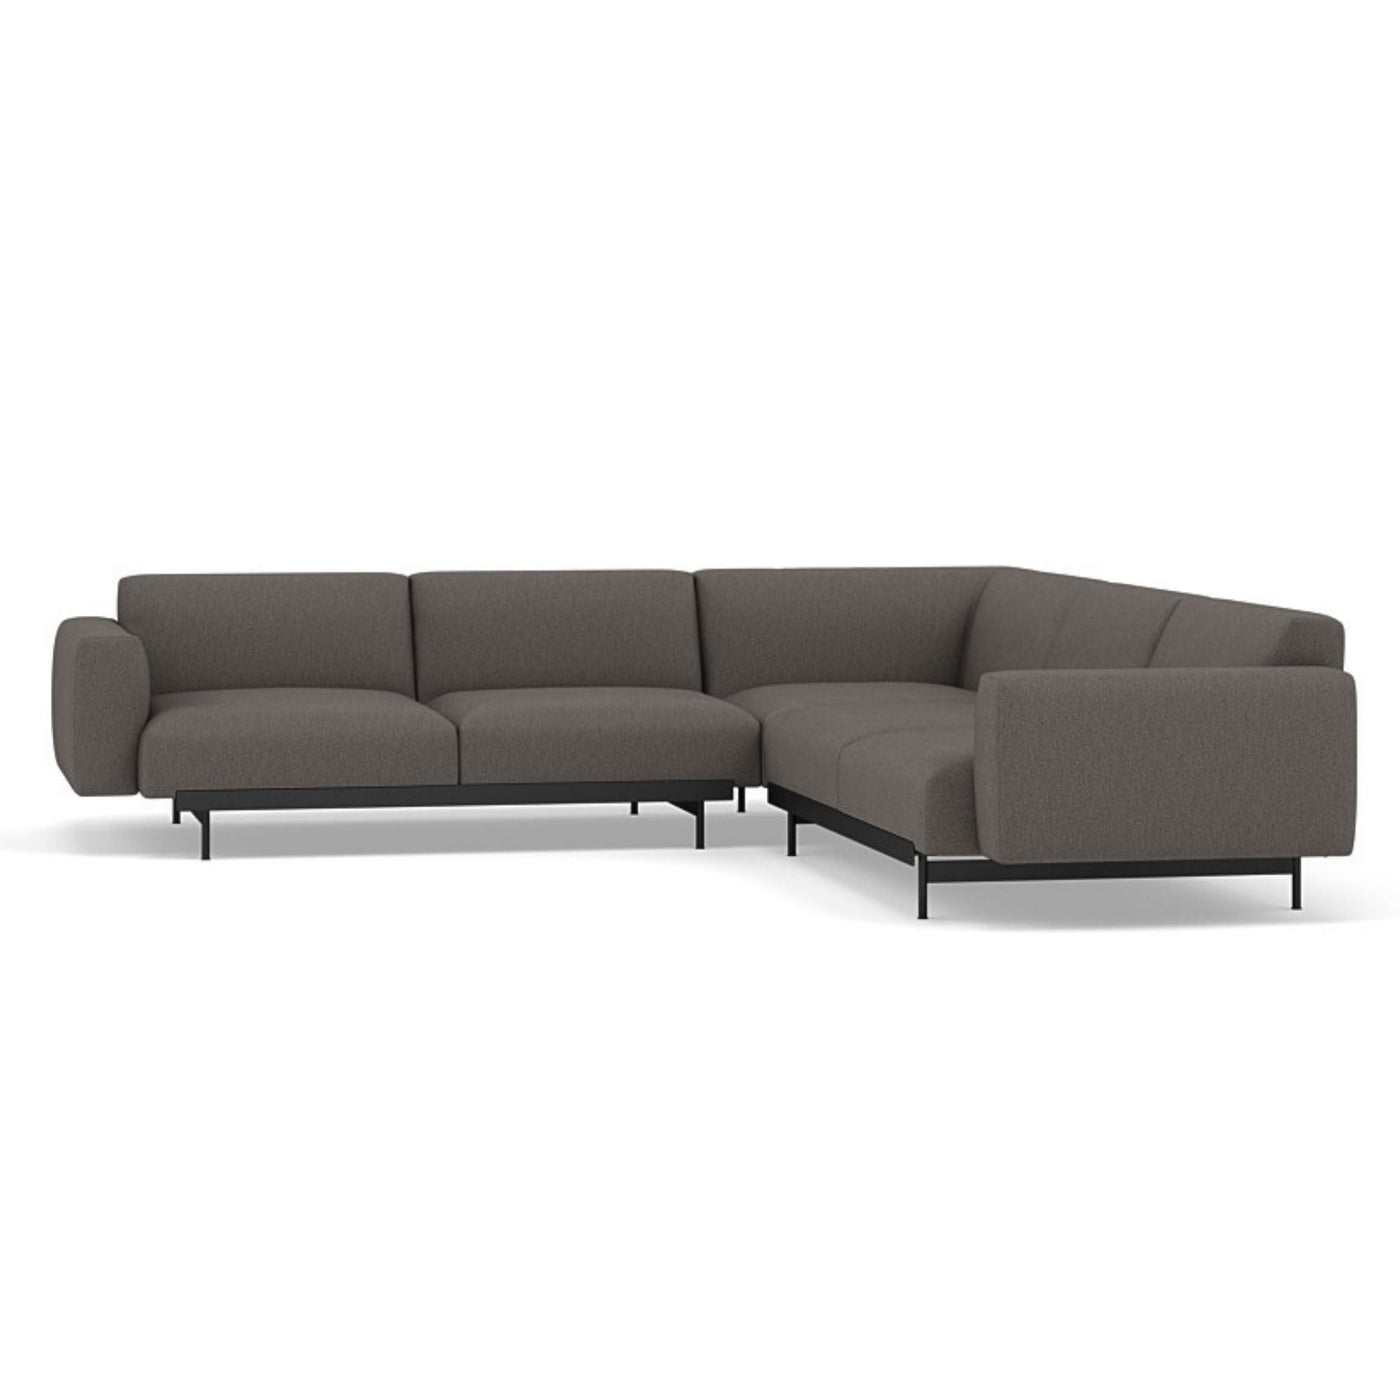 Muuto In Situ corner sofa, configuration 1. Made to order from someday designs. #colour_clay-9